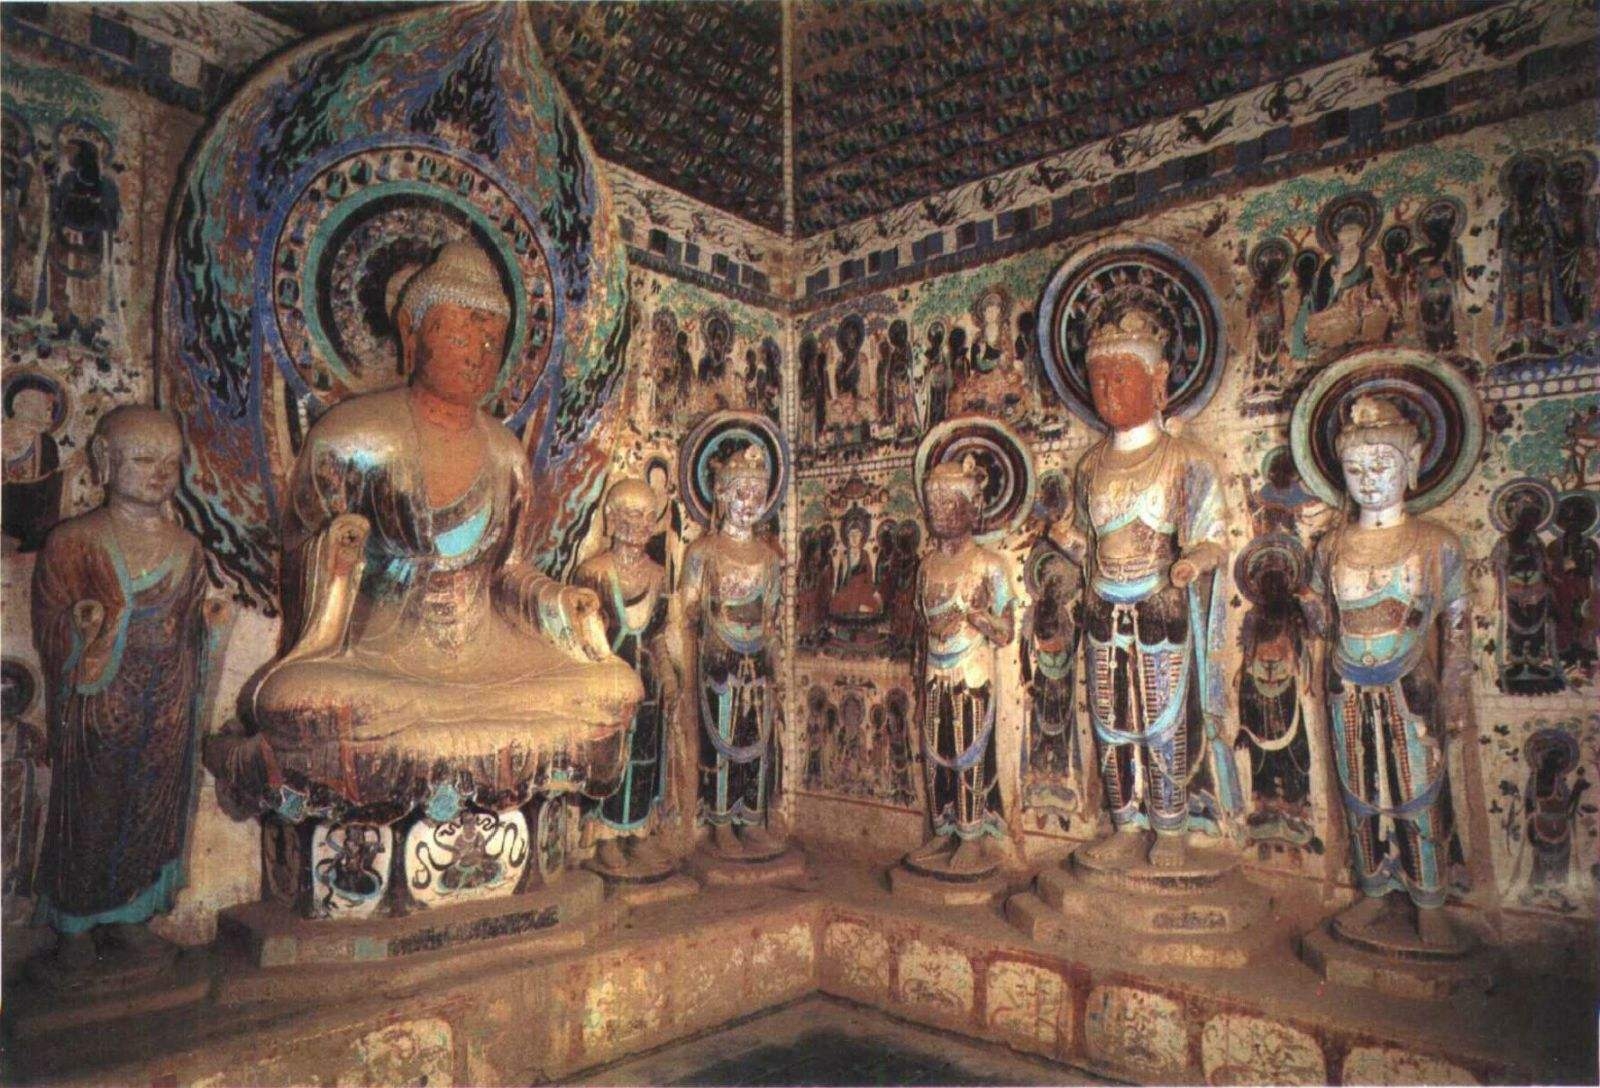 DunHuang Mogao Caves